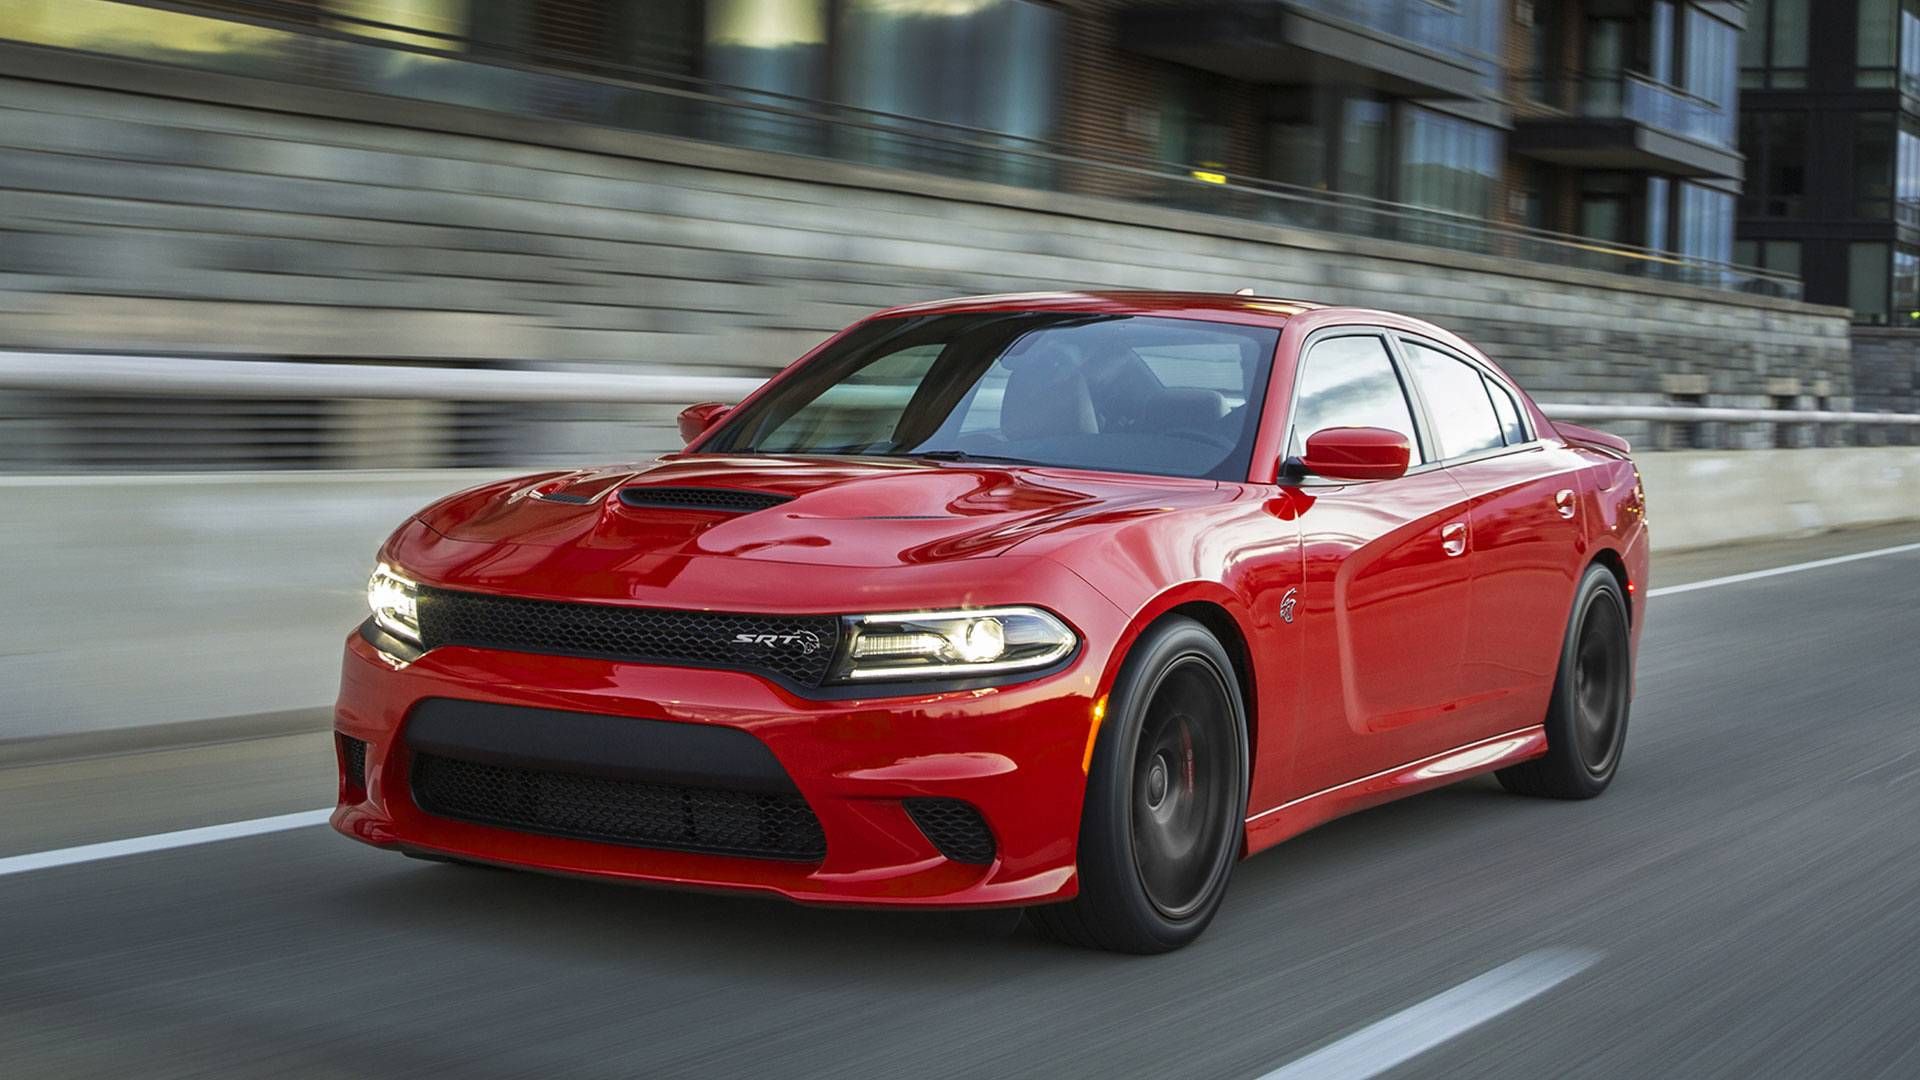 red Dodge Charger SRT Hellcat speeding on the highway